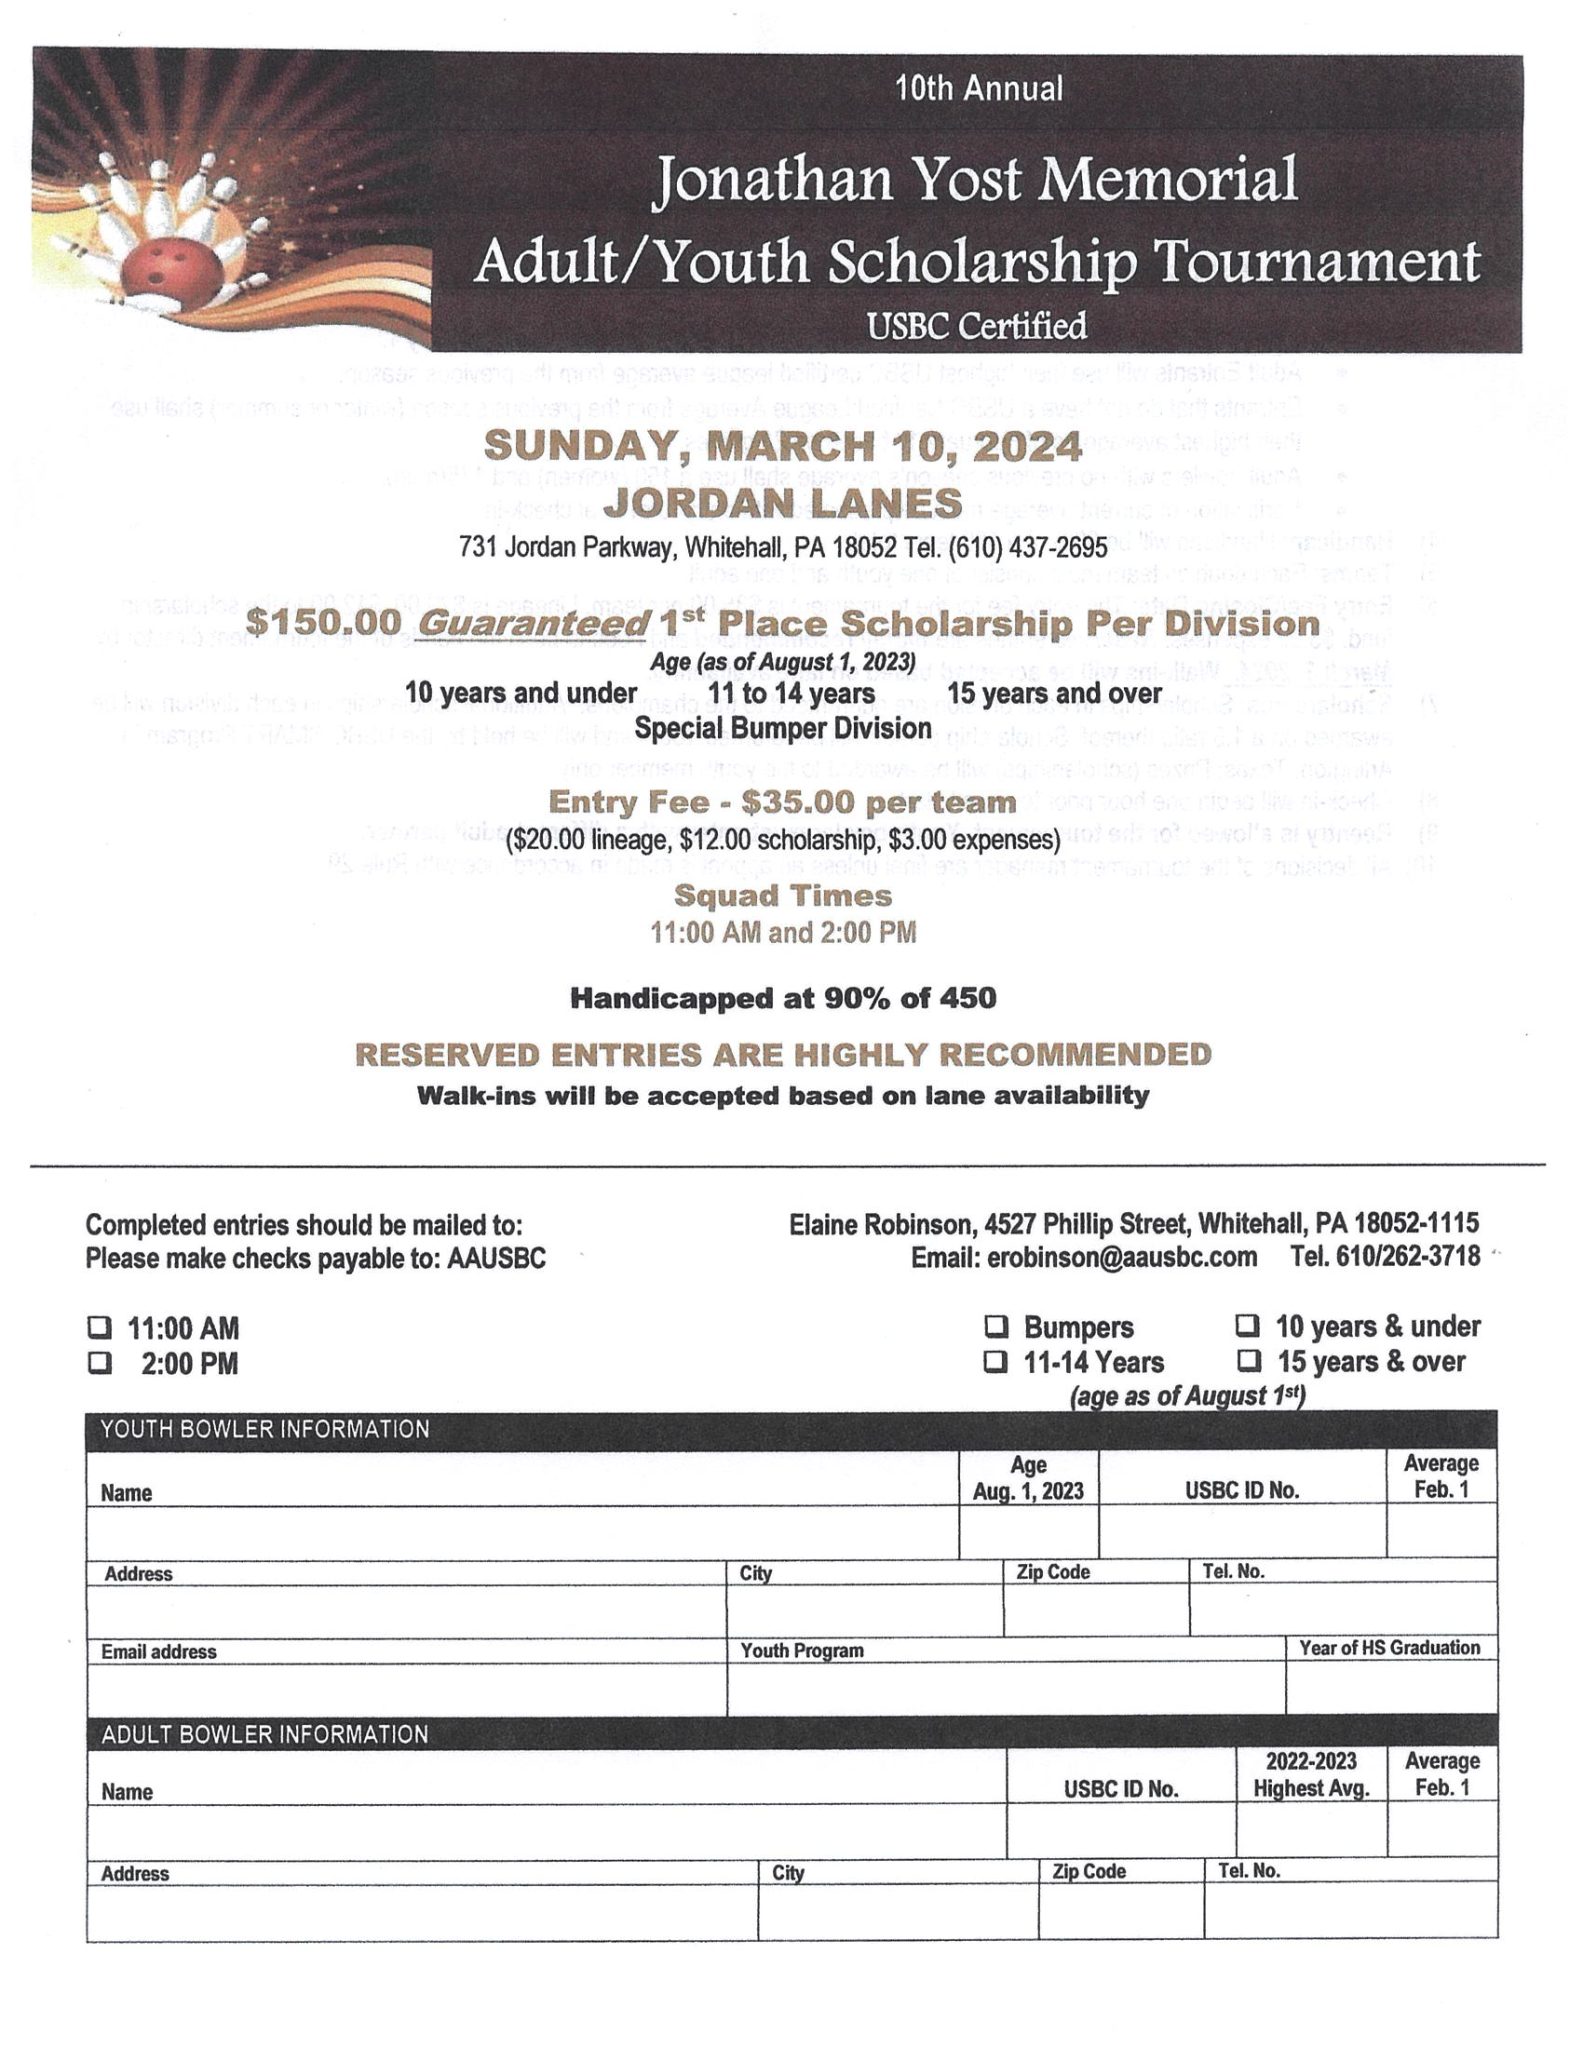 10th Annual Jonathan Yost Memorial Adult / Youth Scholarship Tournament 12